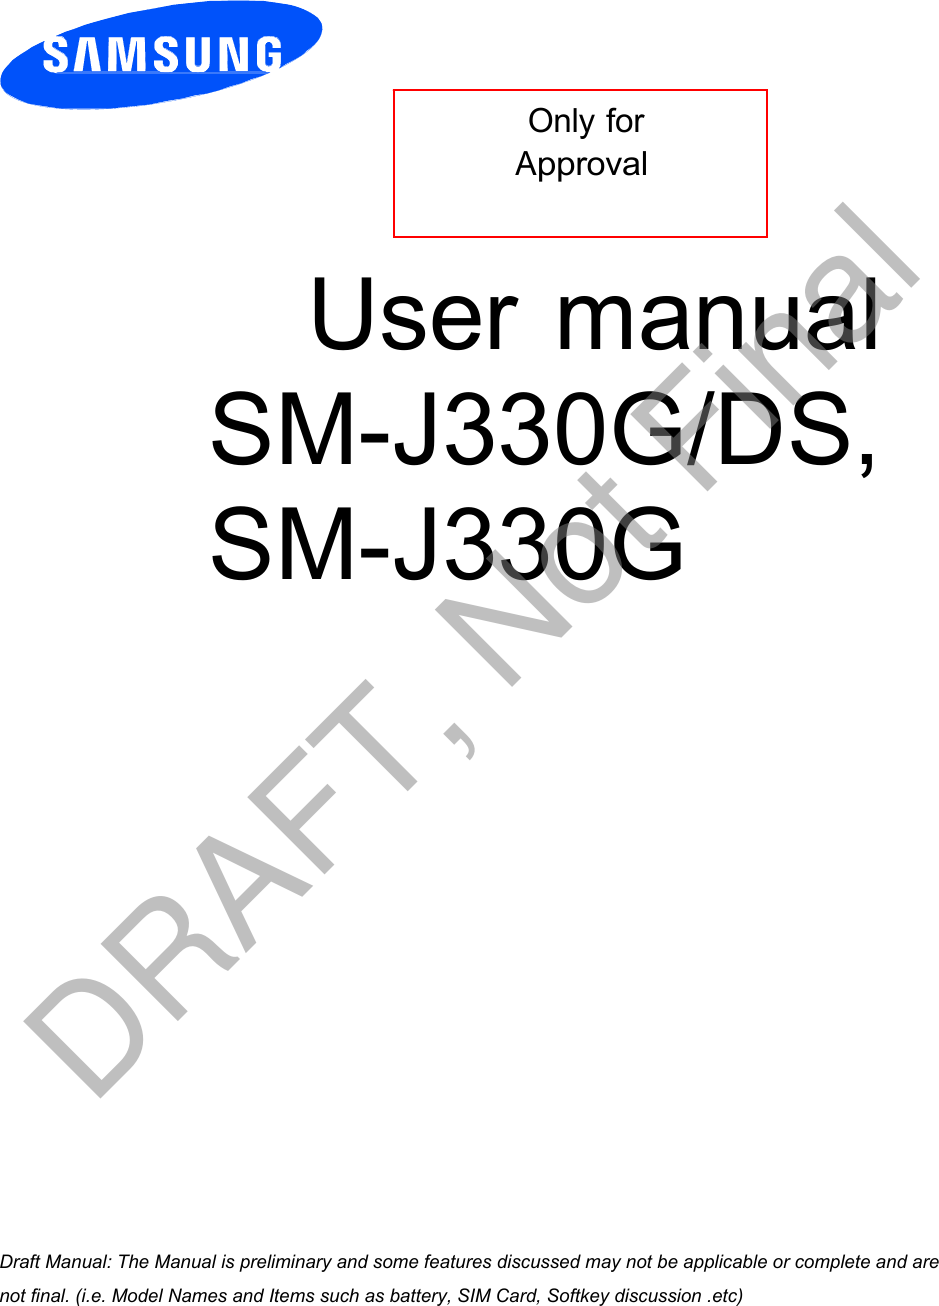  Only for Approval User manual SM-J330G/DS, SM-J330G a ana  ana  na and  a dd a n  aa   and a n na  d a and   a a  ad  dn DRAFT, Not Final